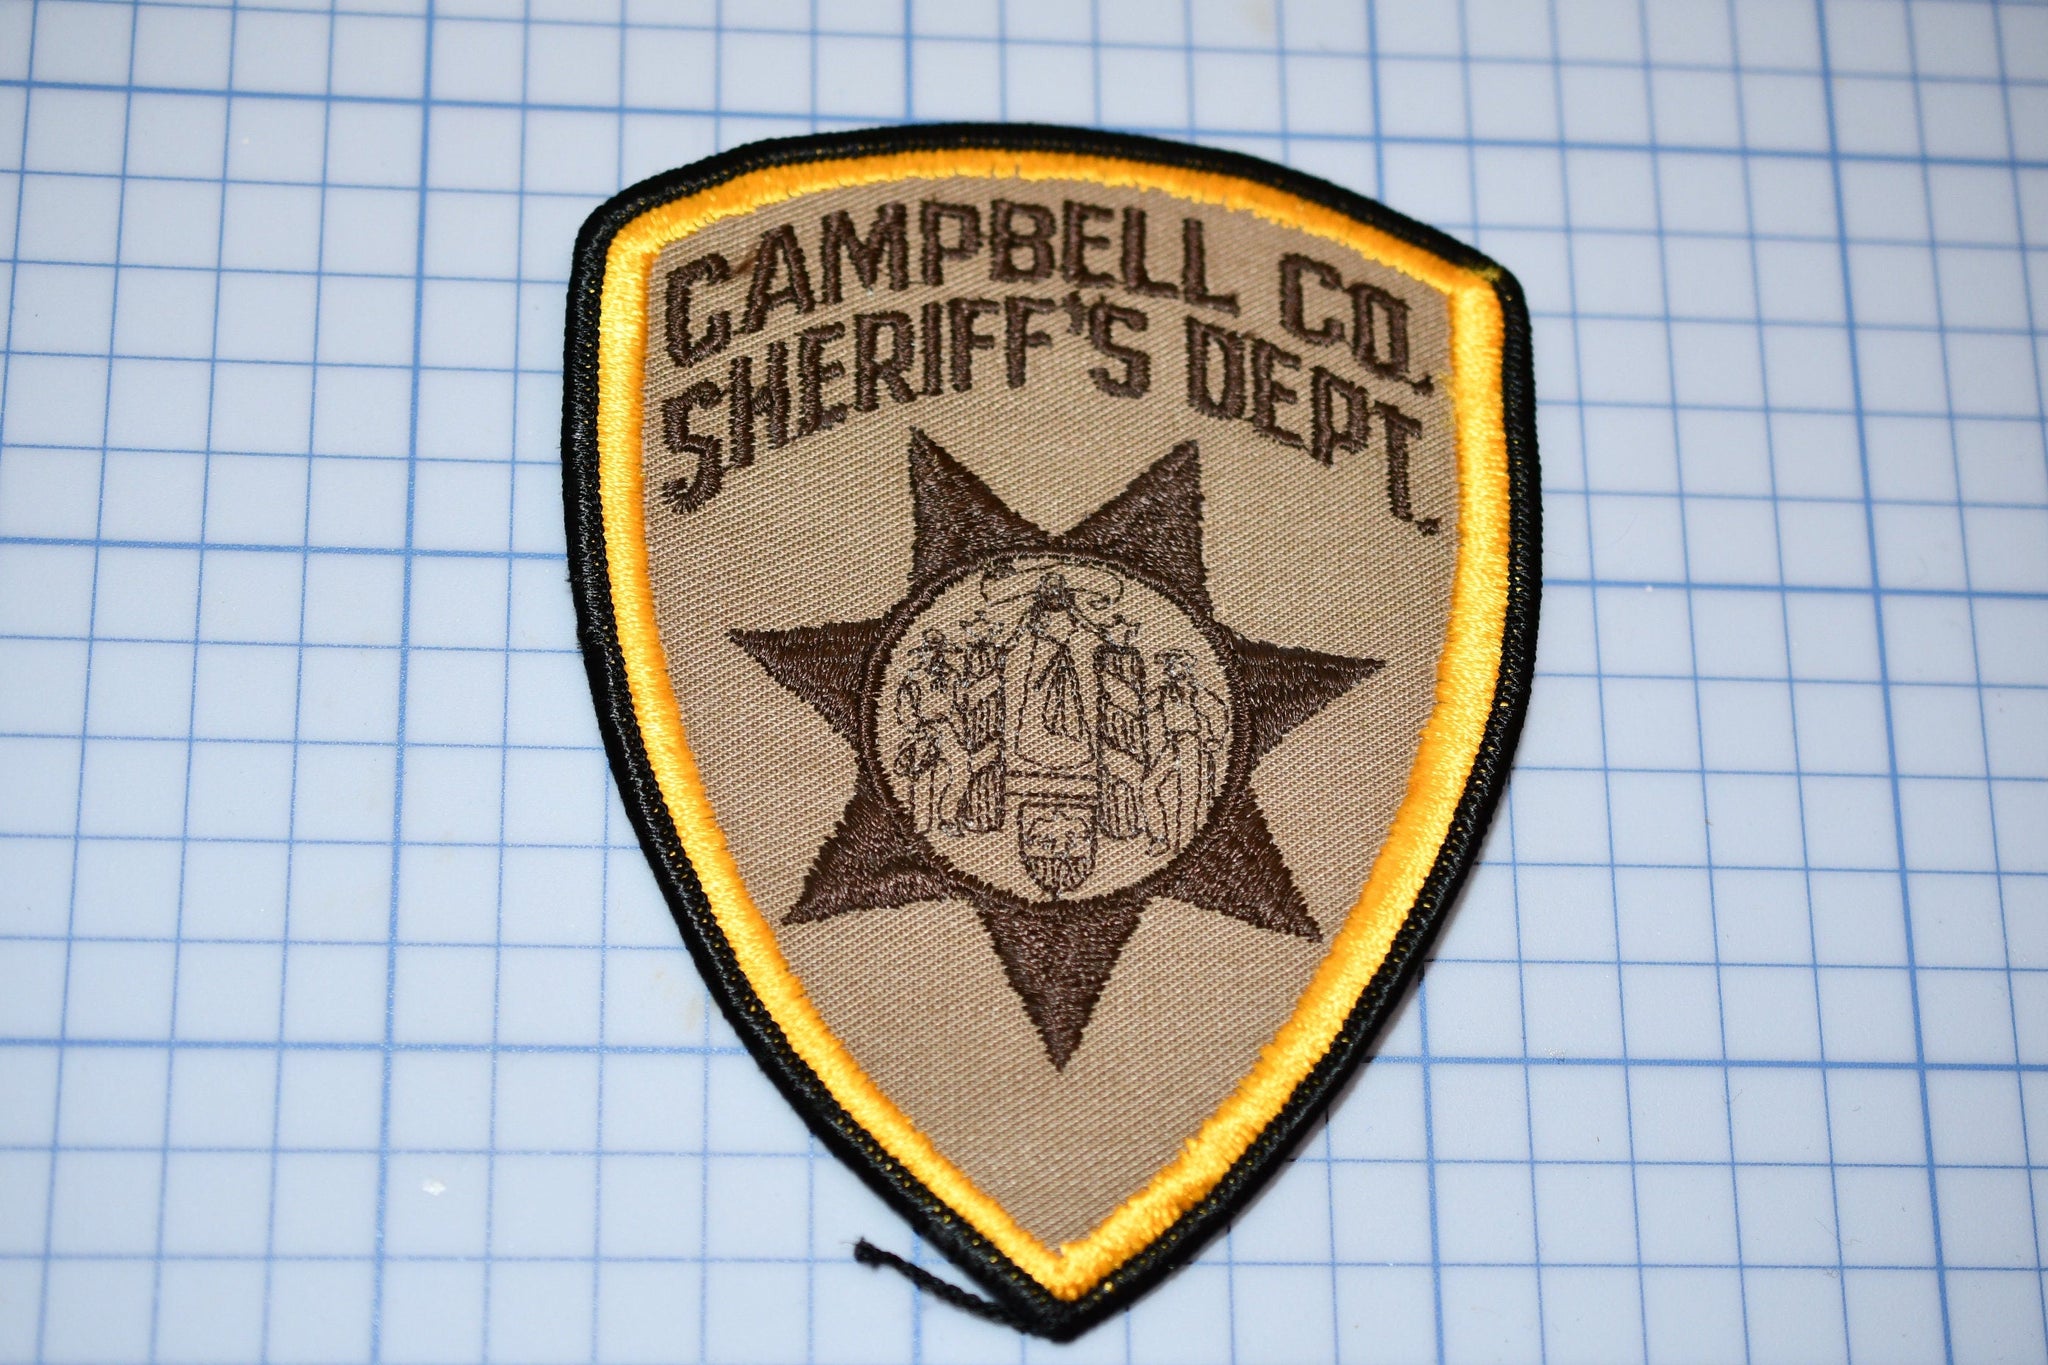 Campbell County Wyoming Sheriff's Department Patch (S4-294)